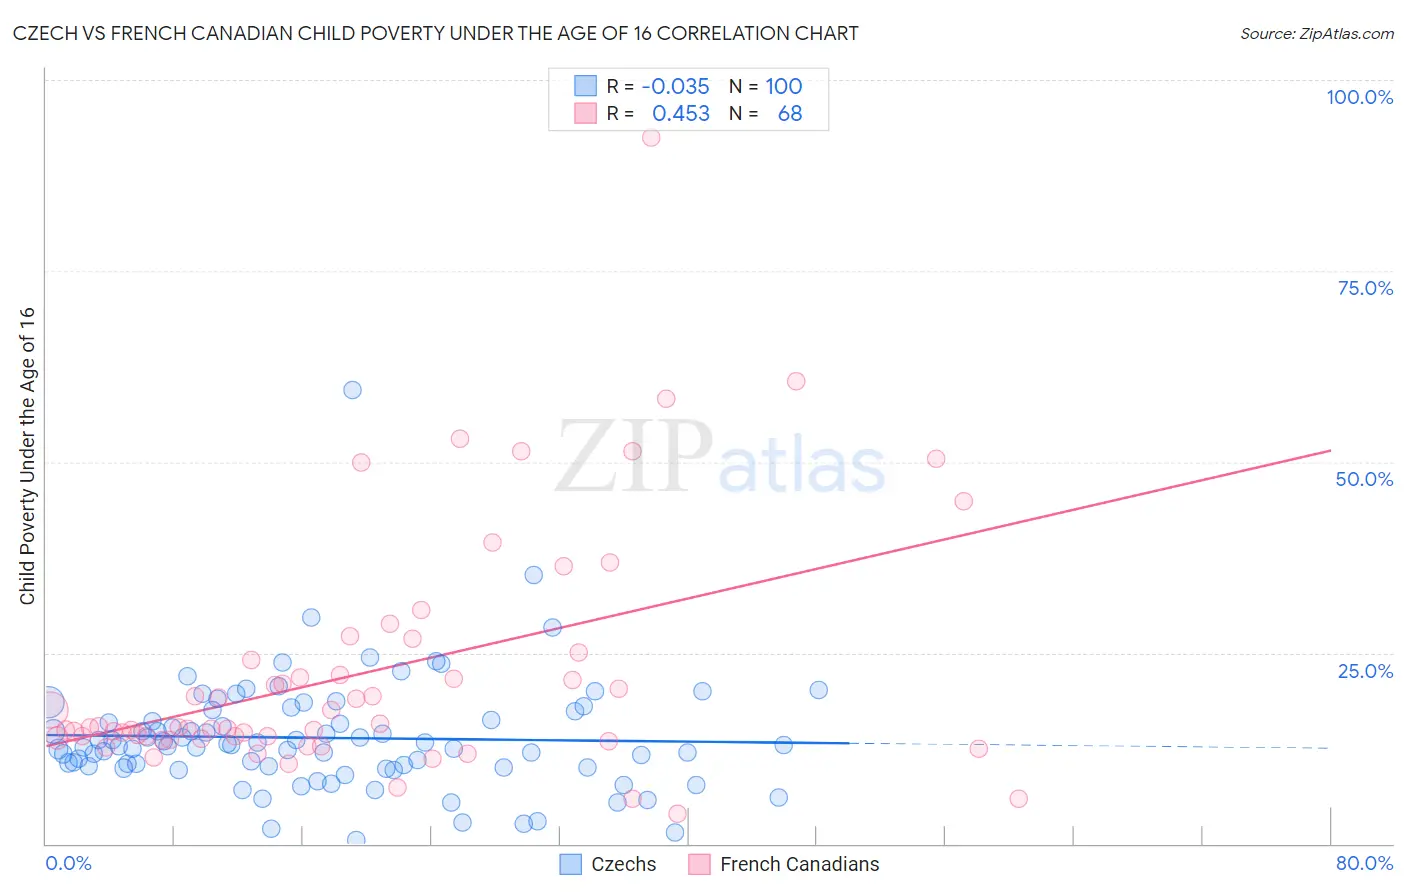 Czech vs French Canadian Child Poverty Under the Age of 16